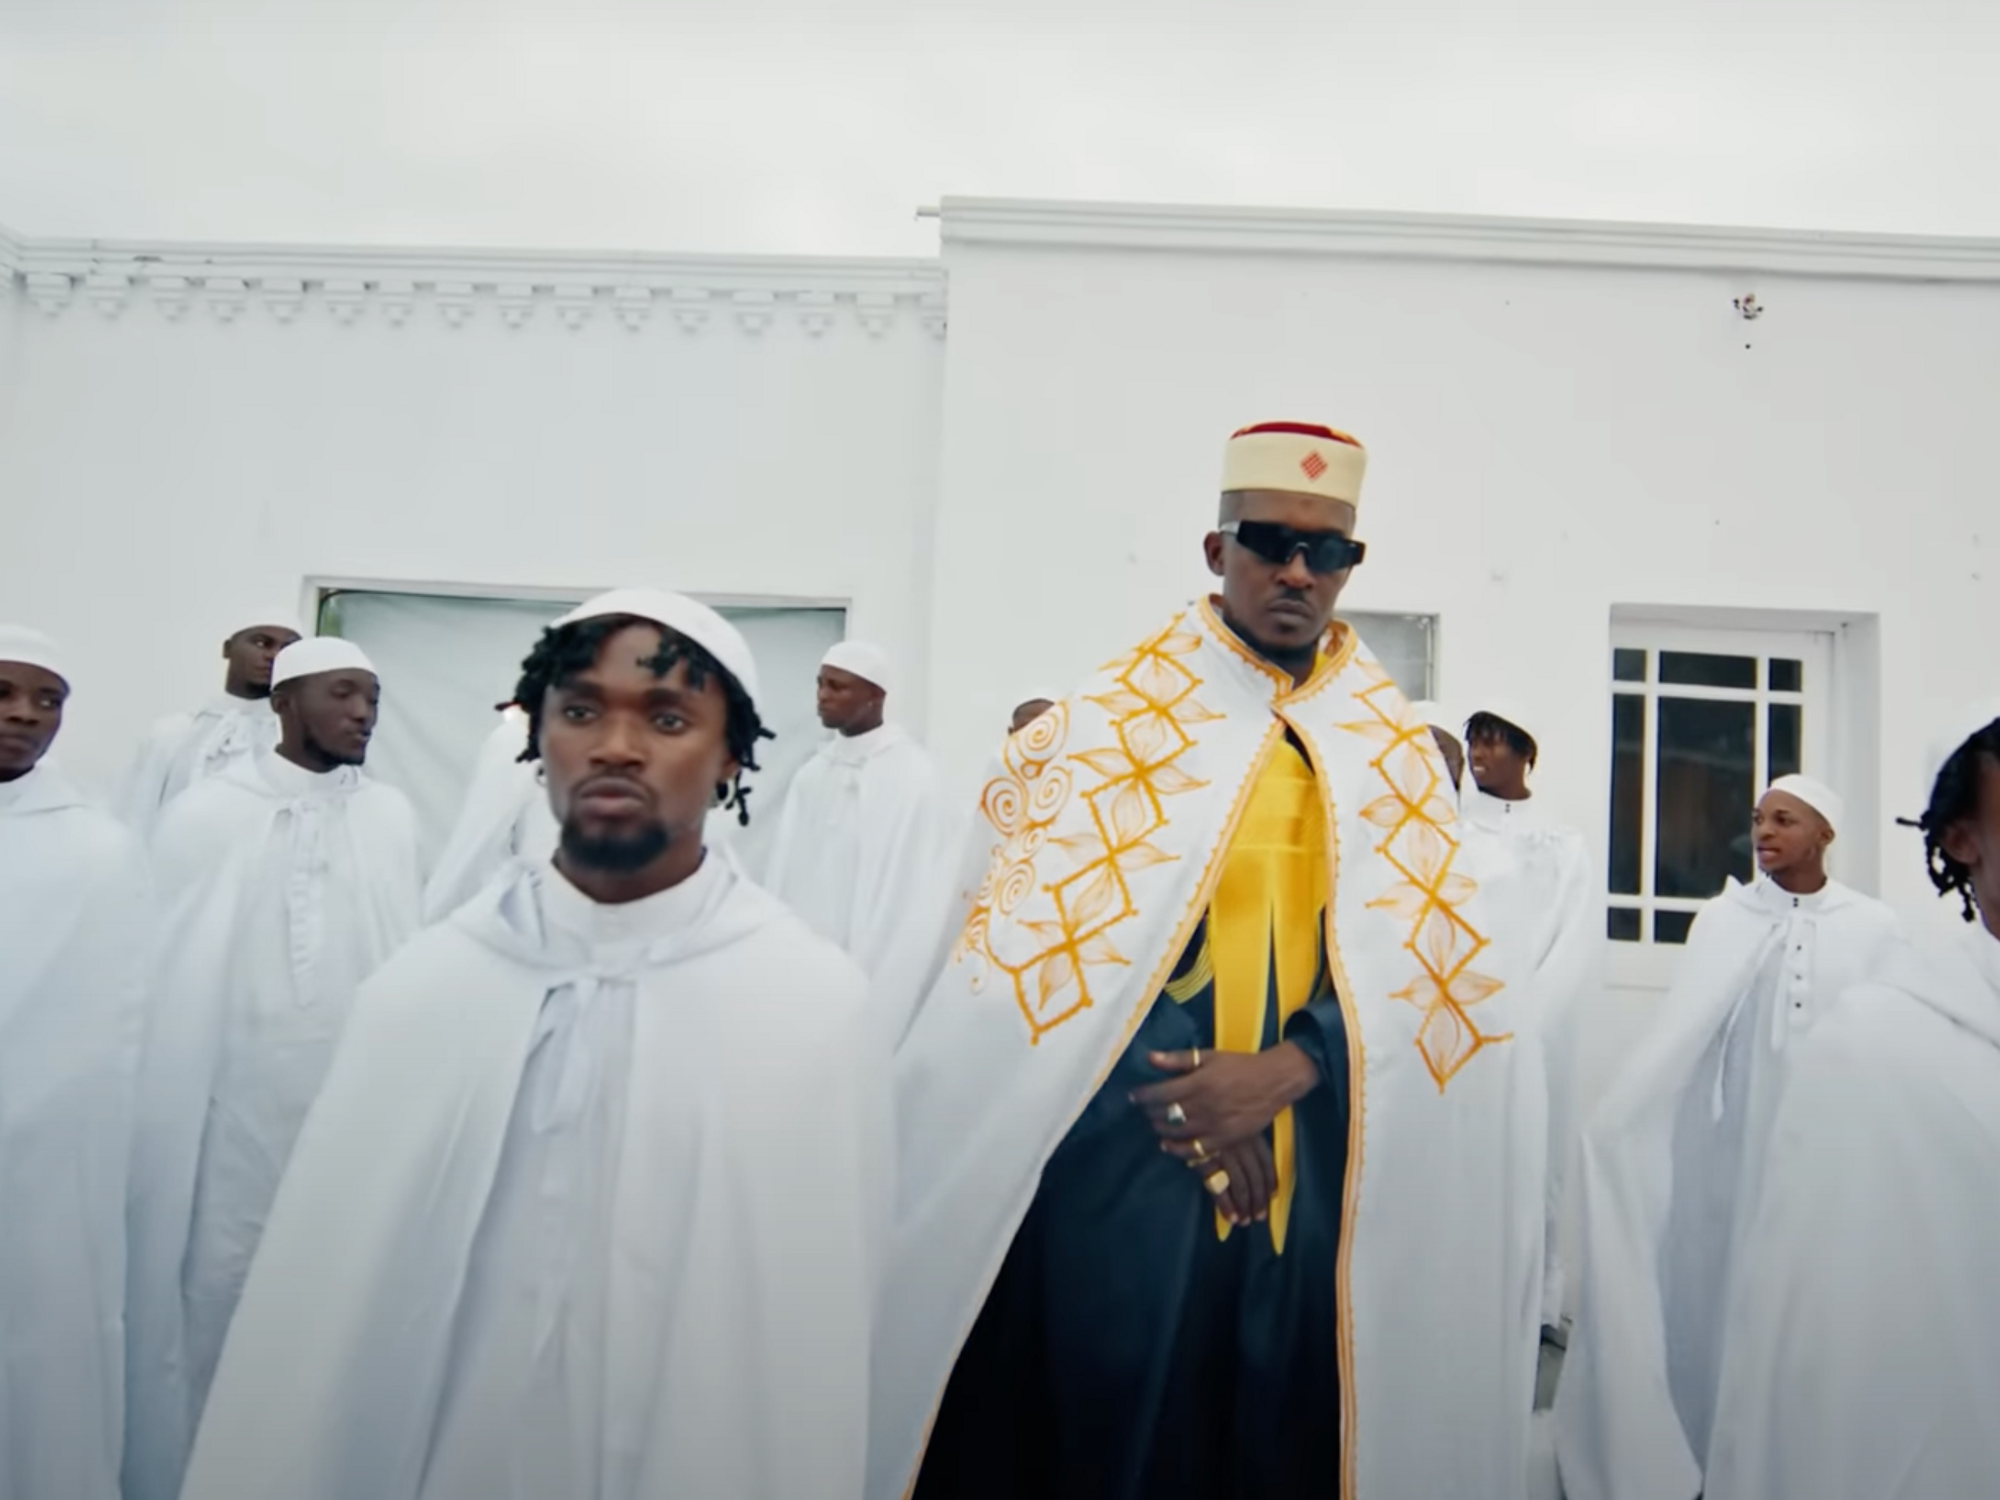 Watch M.I Abaga's Stunning 'The Guy' Video